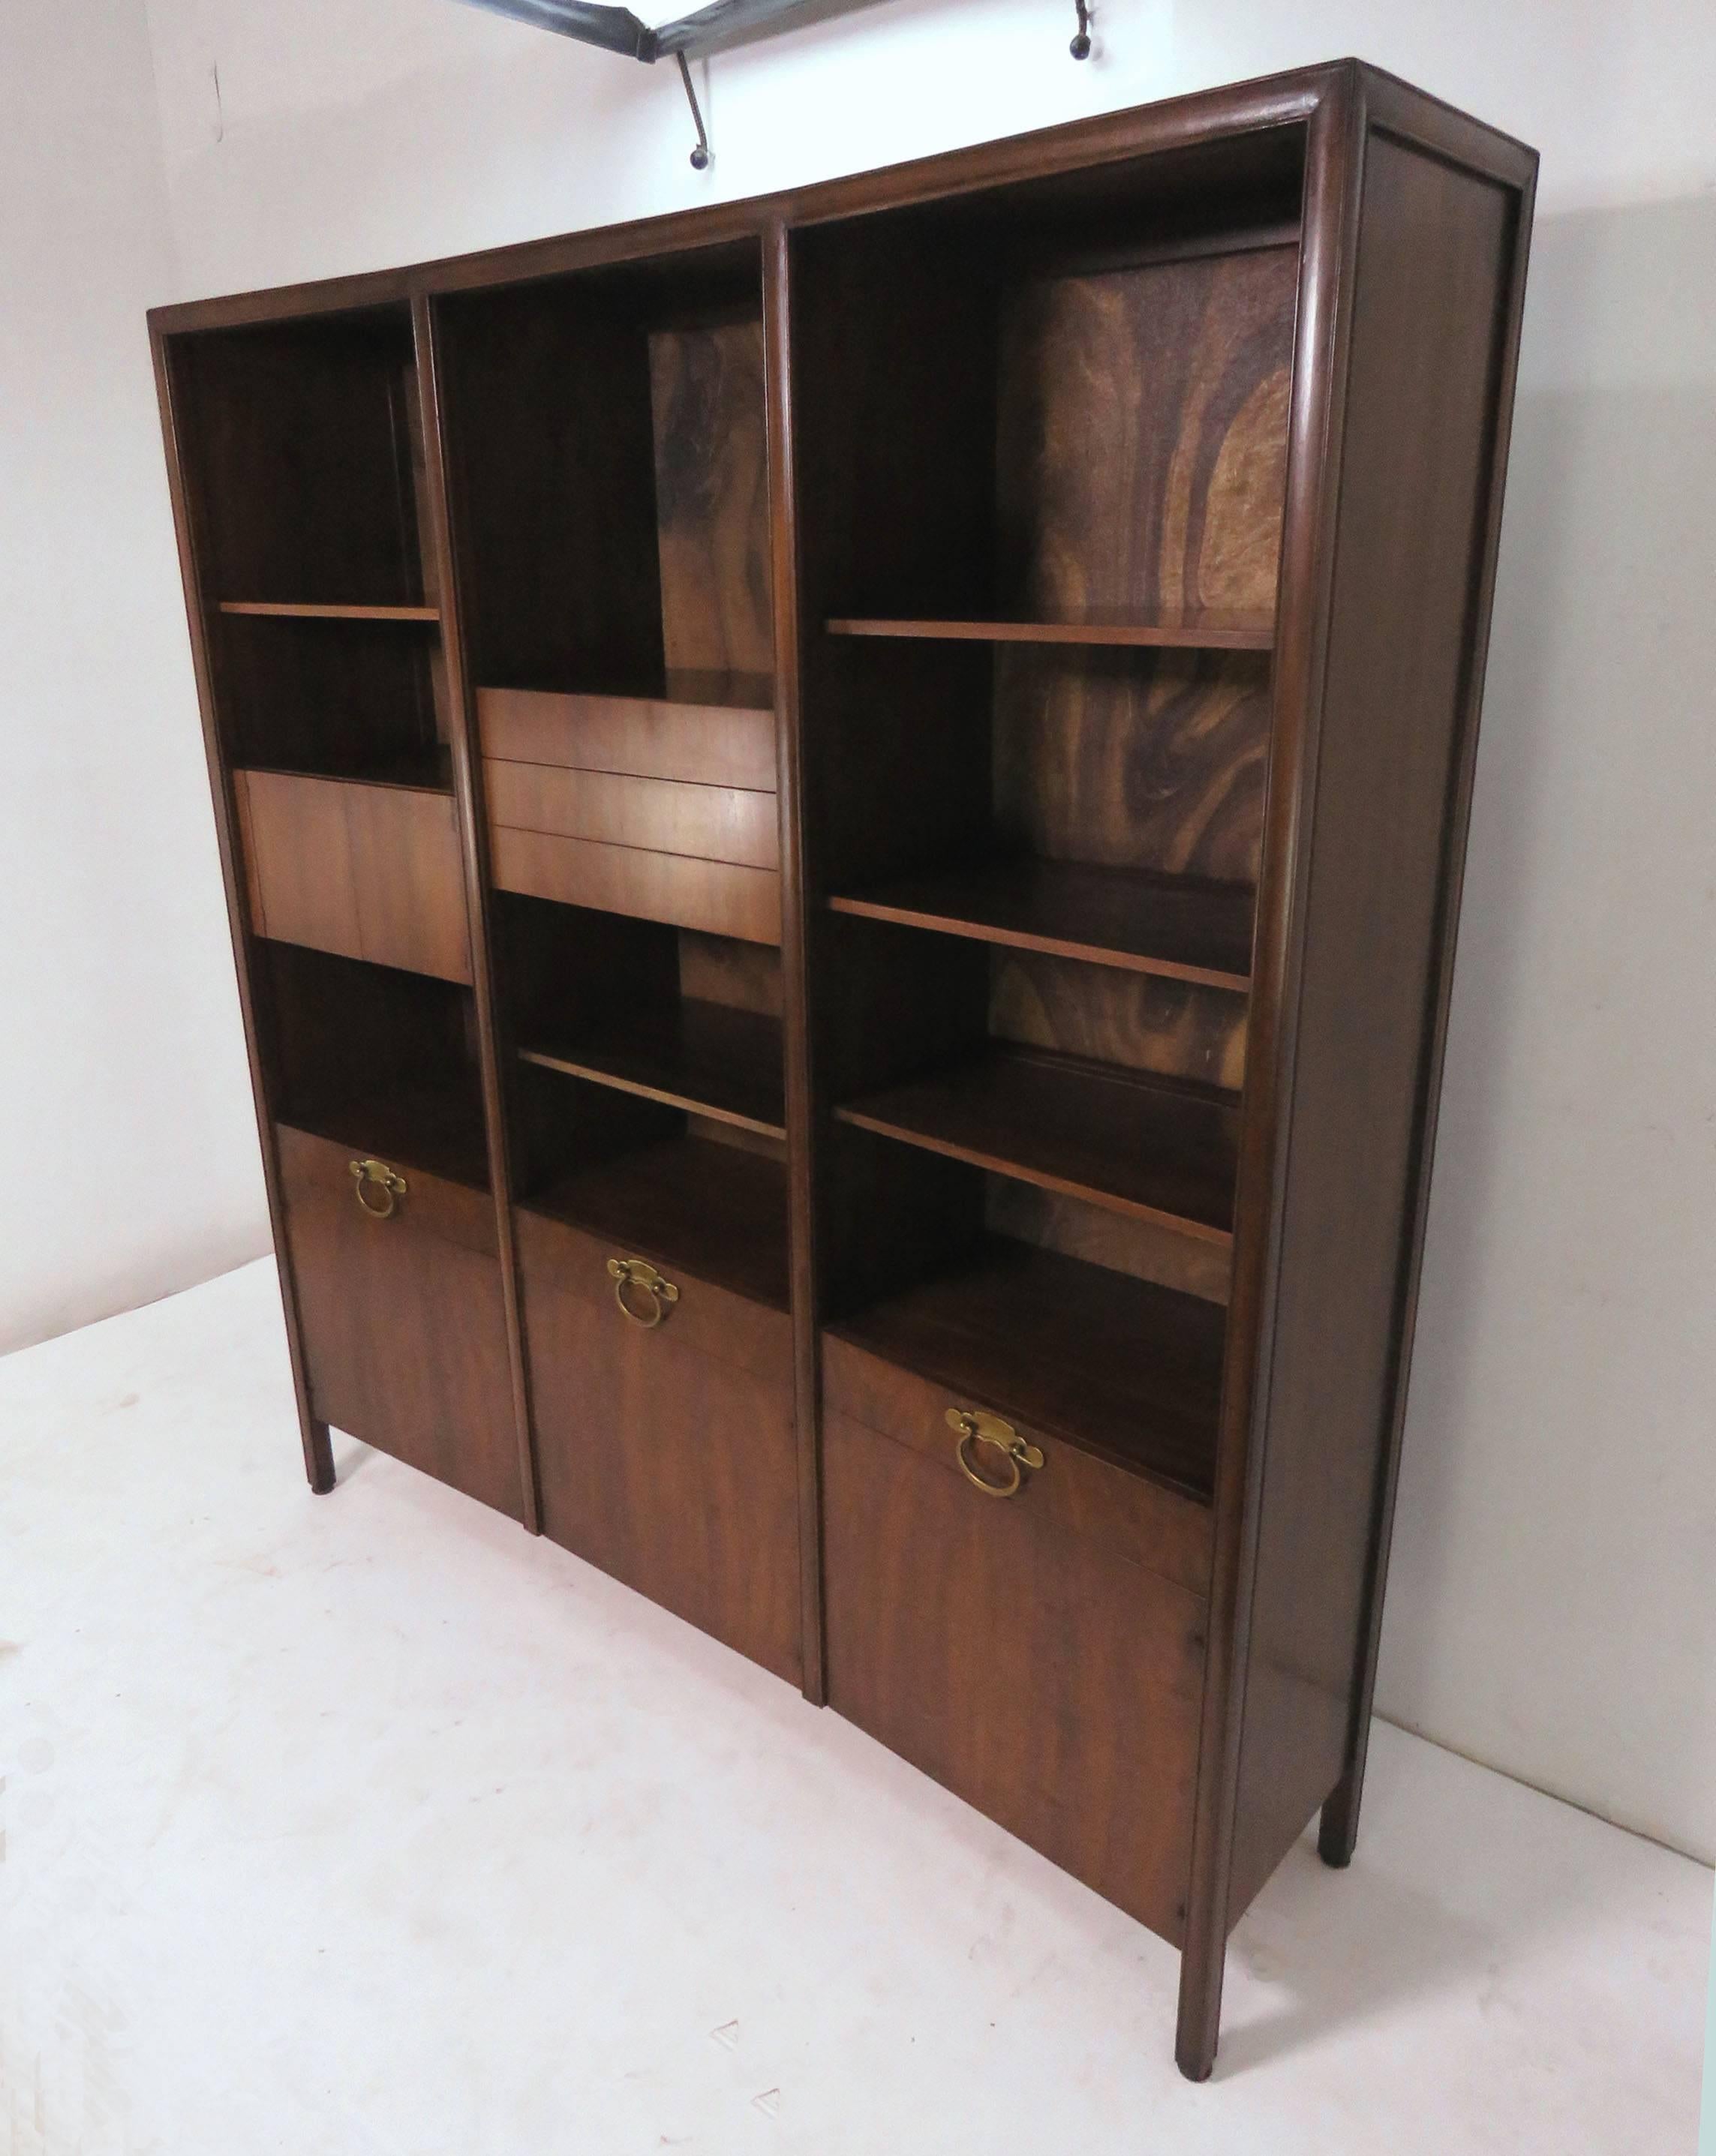 Freestanding wall unit cabinet in walnut with solid brass hardware, by Bert England for John Widdicomb. The upper cabinets and shelves are height adjustable within their three bays. The back of the unit is also finished so it may serve as a room